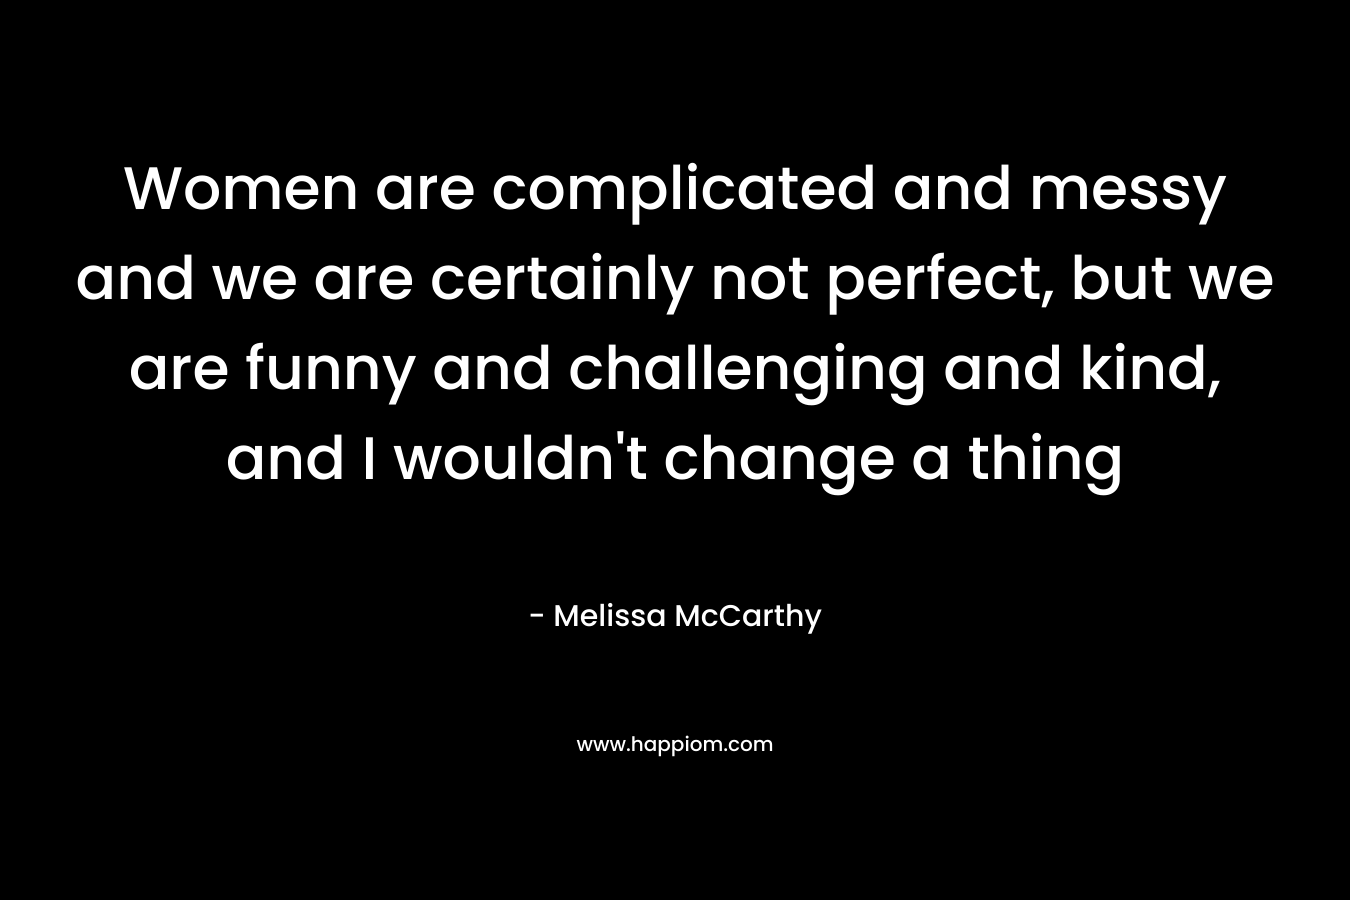 Women are complicated and messy and we are certainly not perfect, but we are funny and challenging and kind, and I wouldn't change a thing